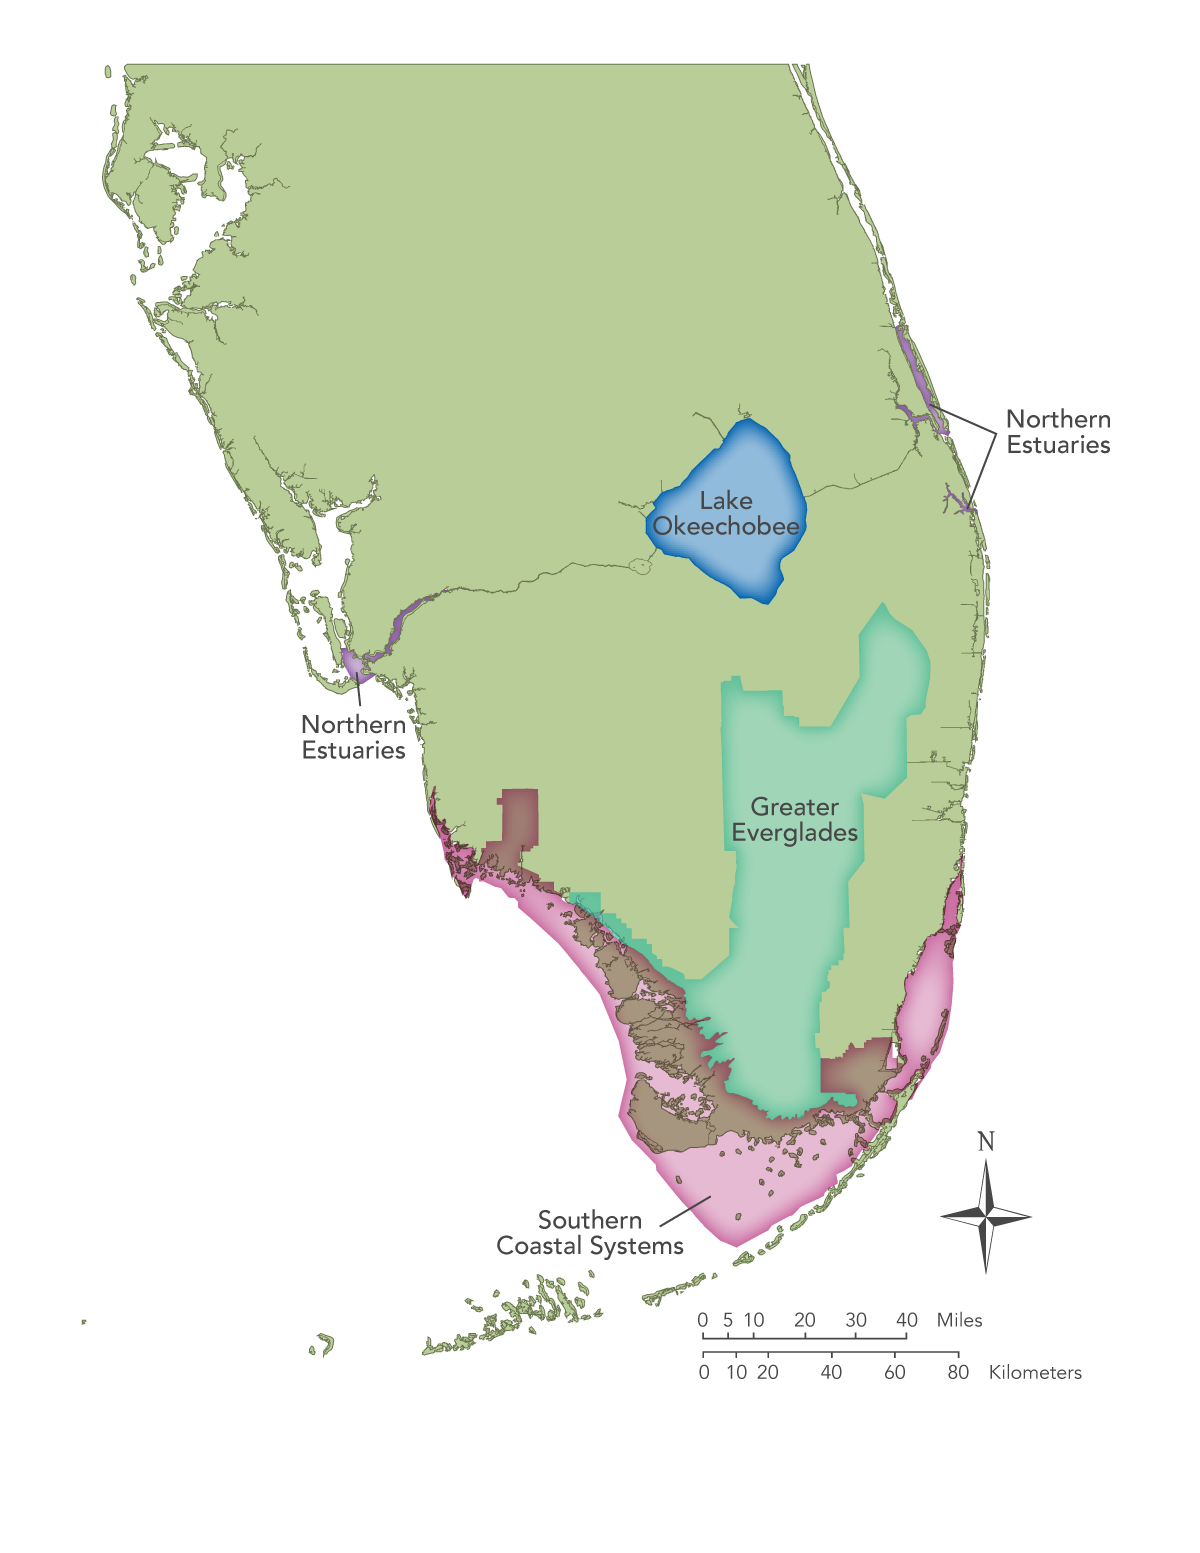 Map of Central and Southern Florida showing the four major regions making up the Everglades system. The regions include Lake Okeechobee, the Northern Estuaries, Greater Everglades, and Southern Coastal Systems.